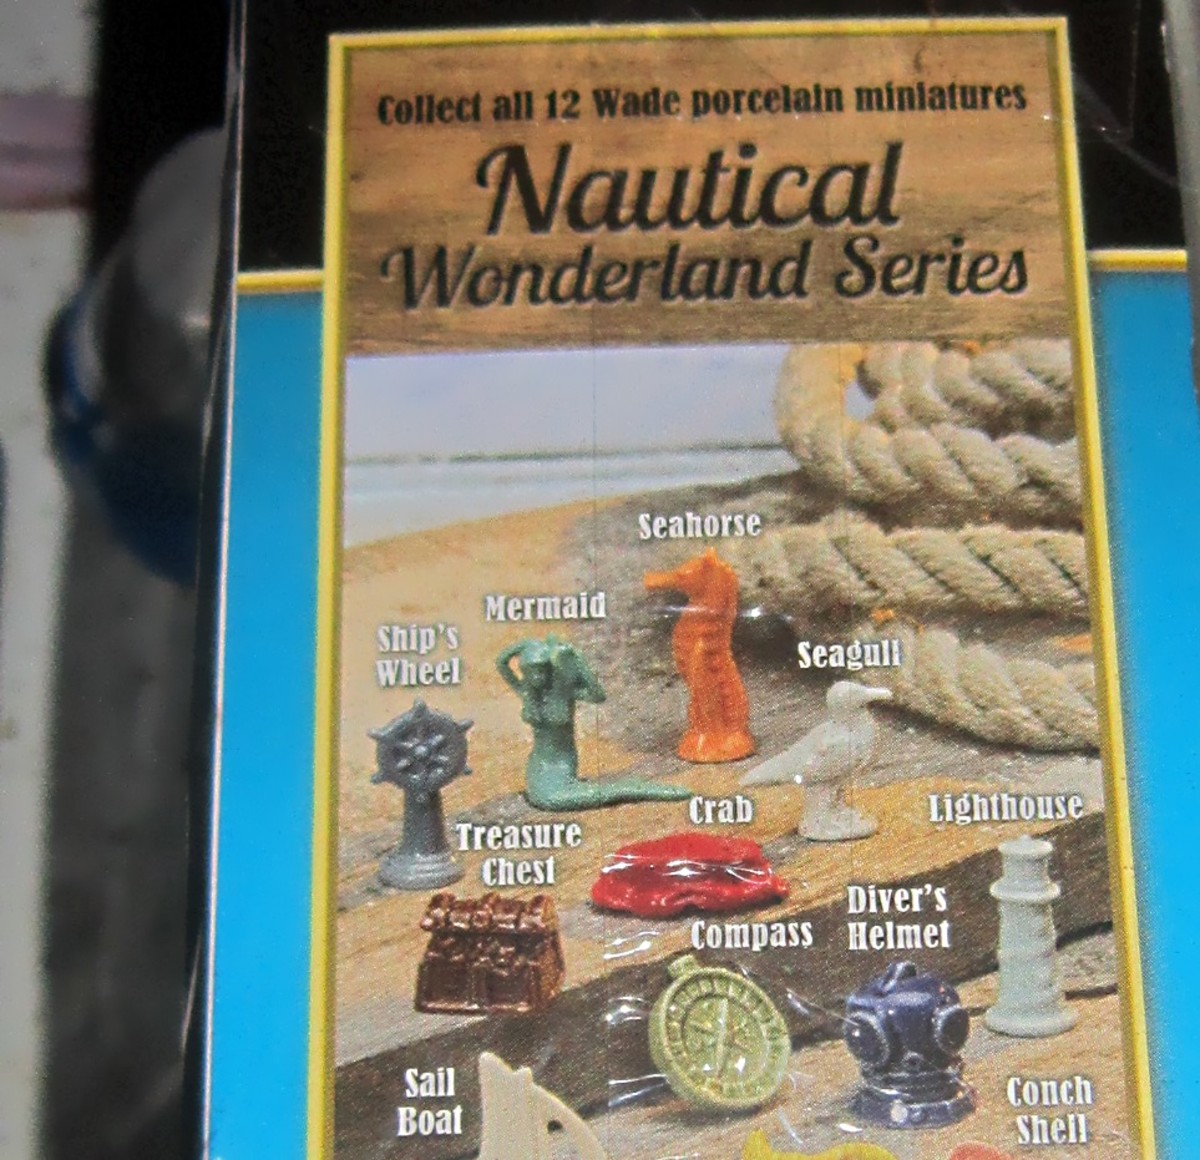 Wade's "Nautical Wonderland Series", pictured on the Red Rose tea box.